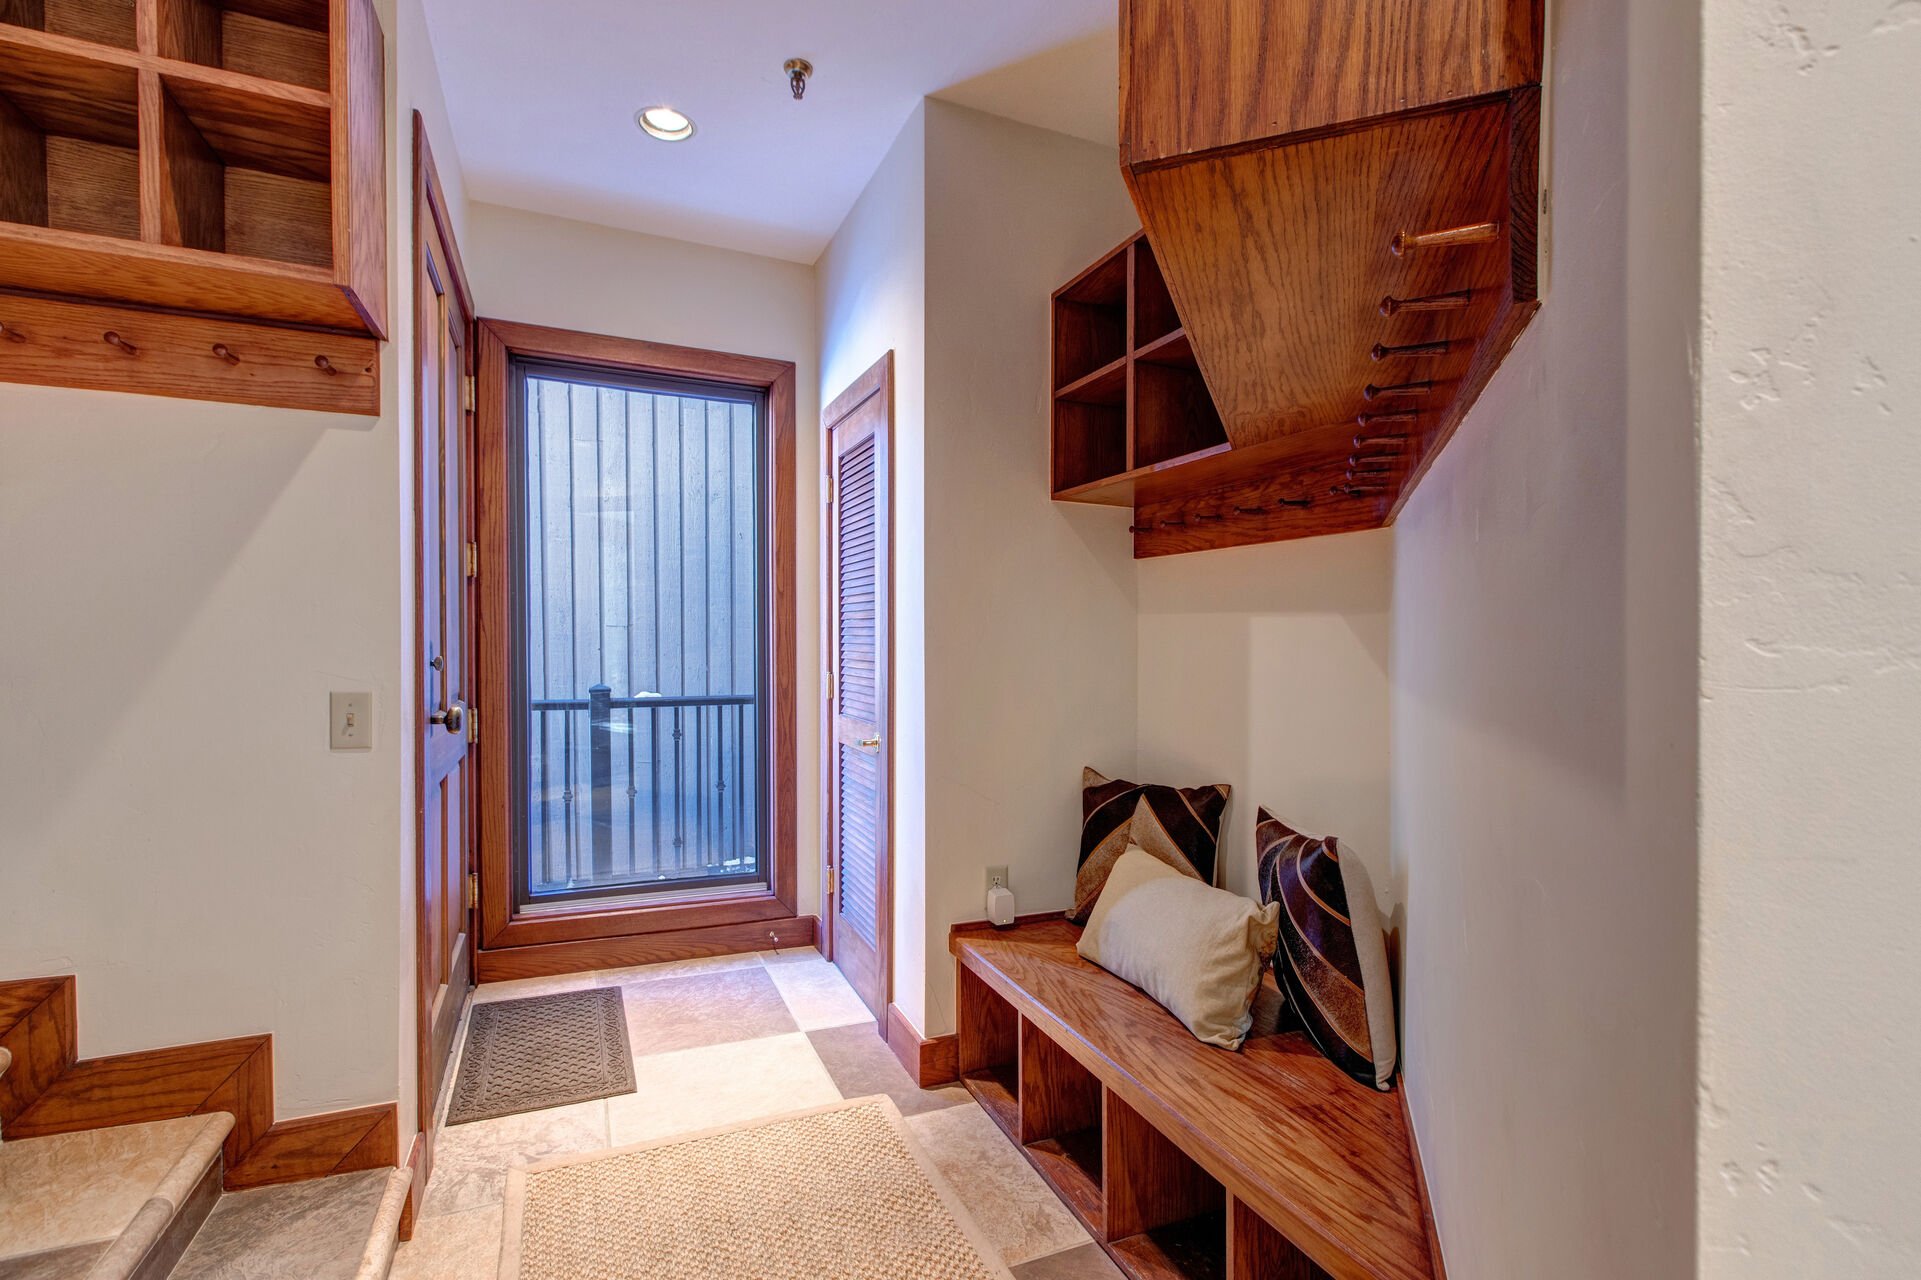 Entryway with convenient bench, coat & equipment hooks, and storage cubbies